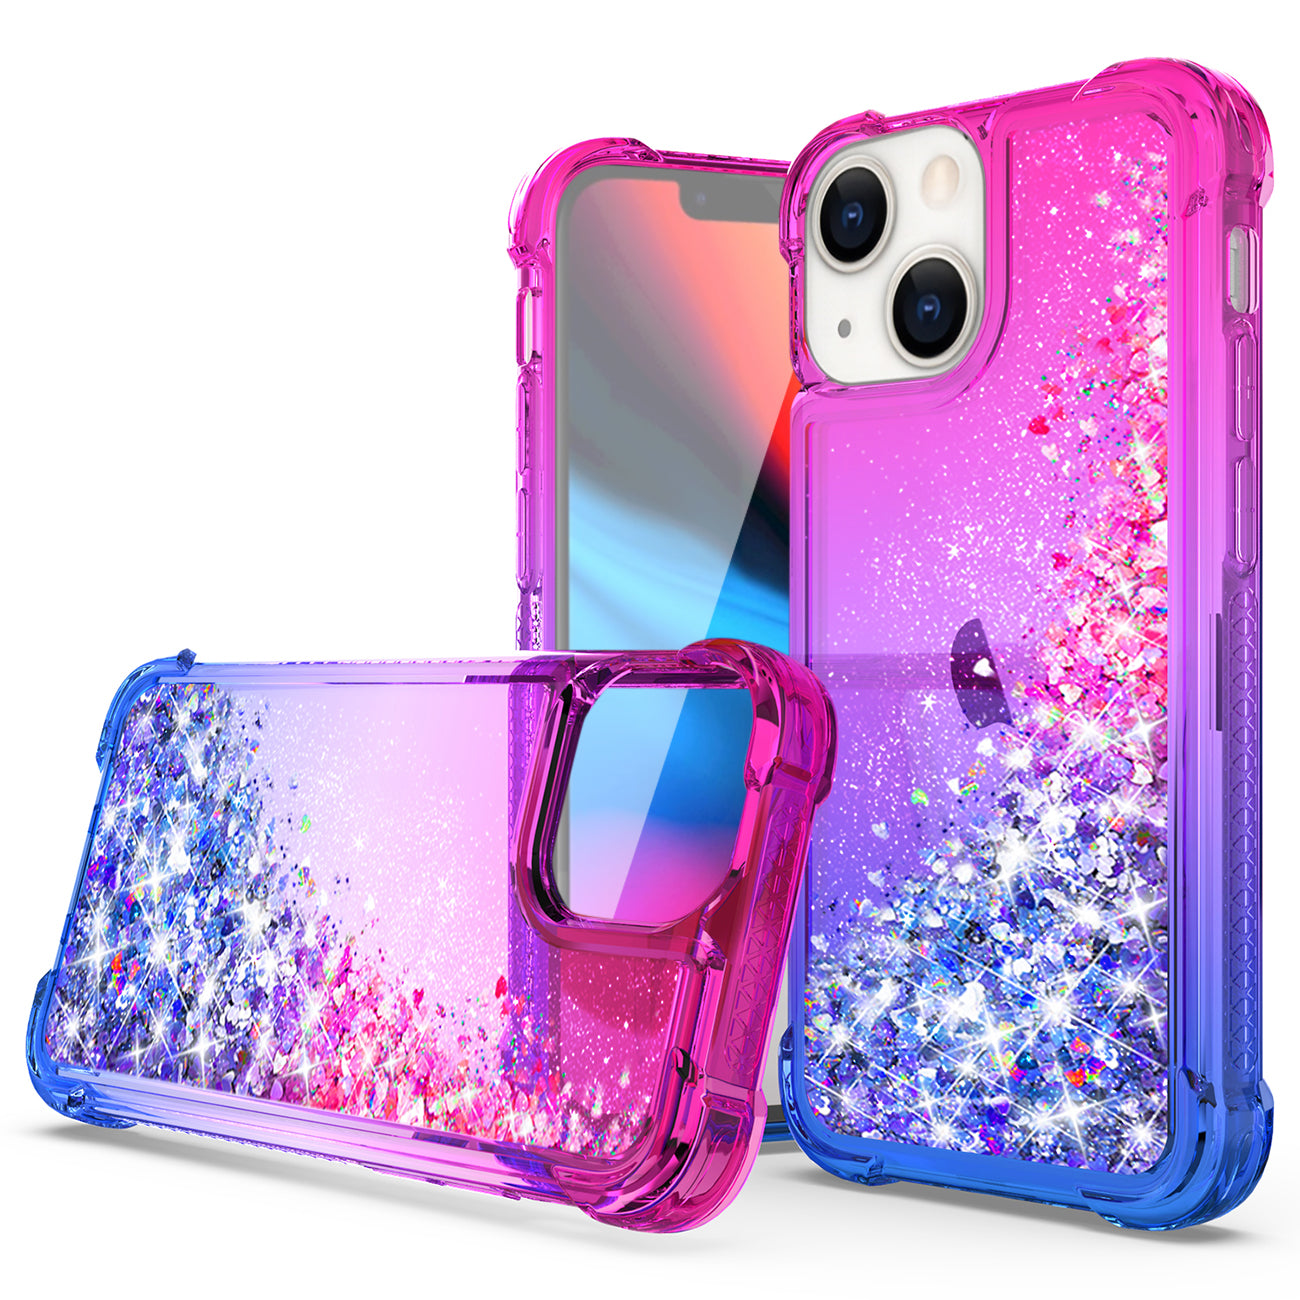 Shiny Flowing Glitter Liquid Bumper Case For APPLE IPHONE 13 In Pink